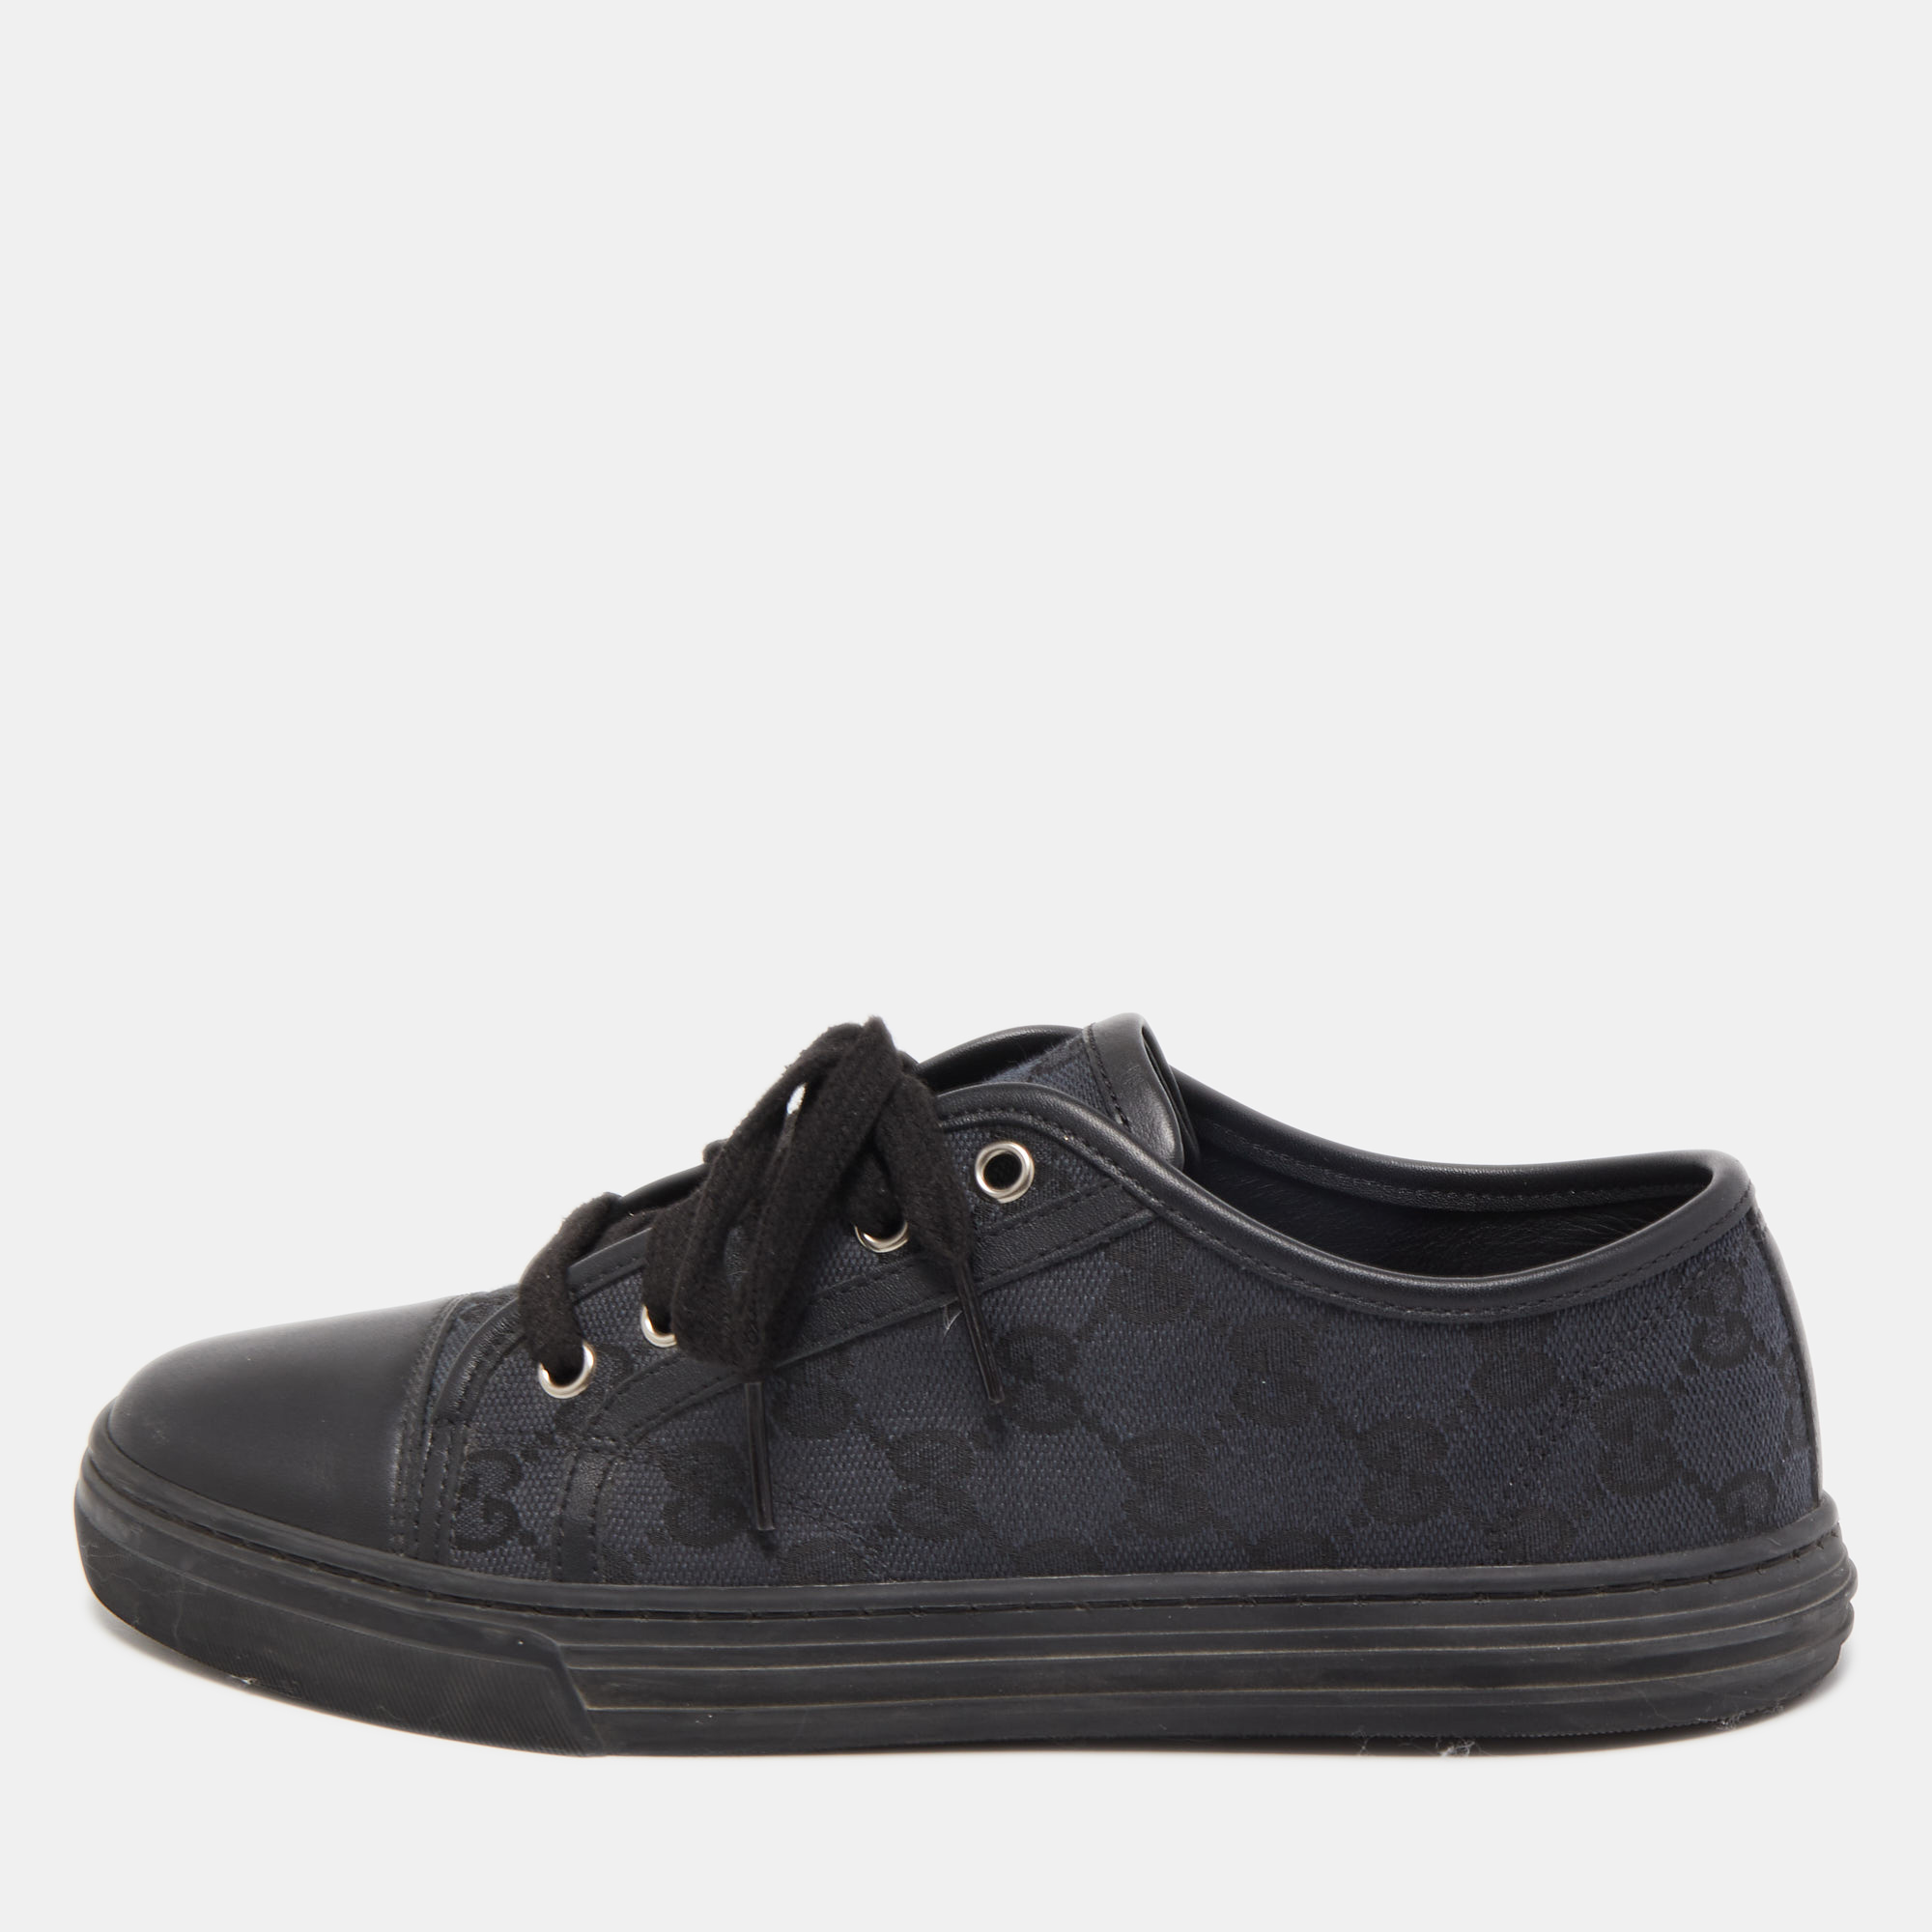 Gucci Black Leather And GG Canvas Cap Toe Low Top Sneakers Size 37.5